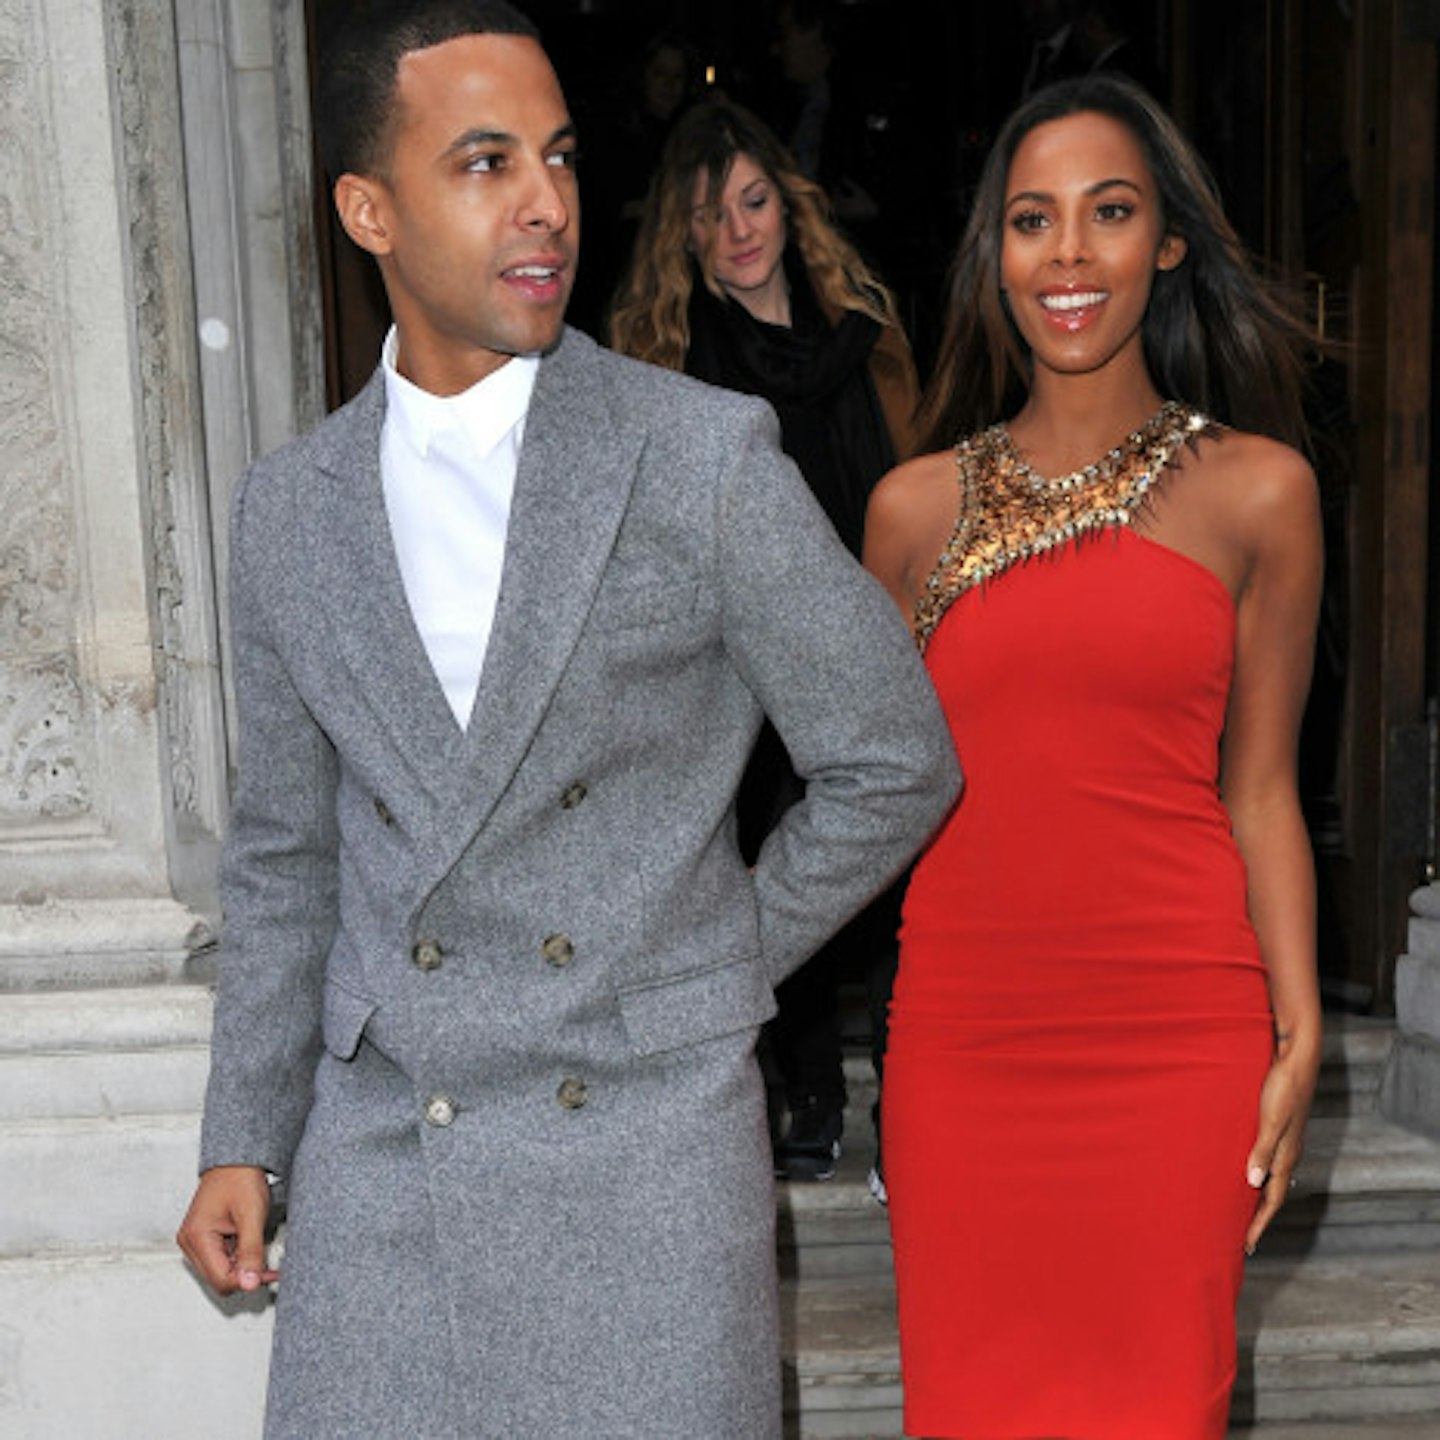 Rochelle and Marvin married in 2012